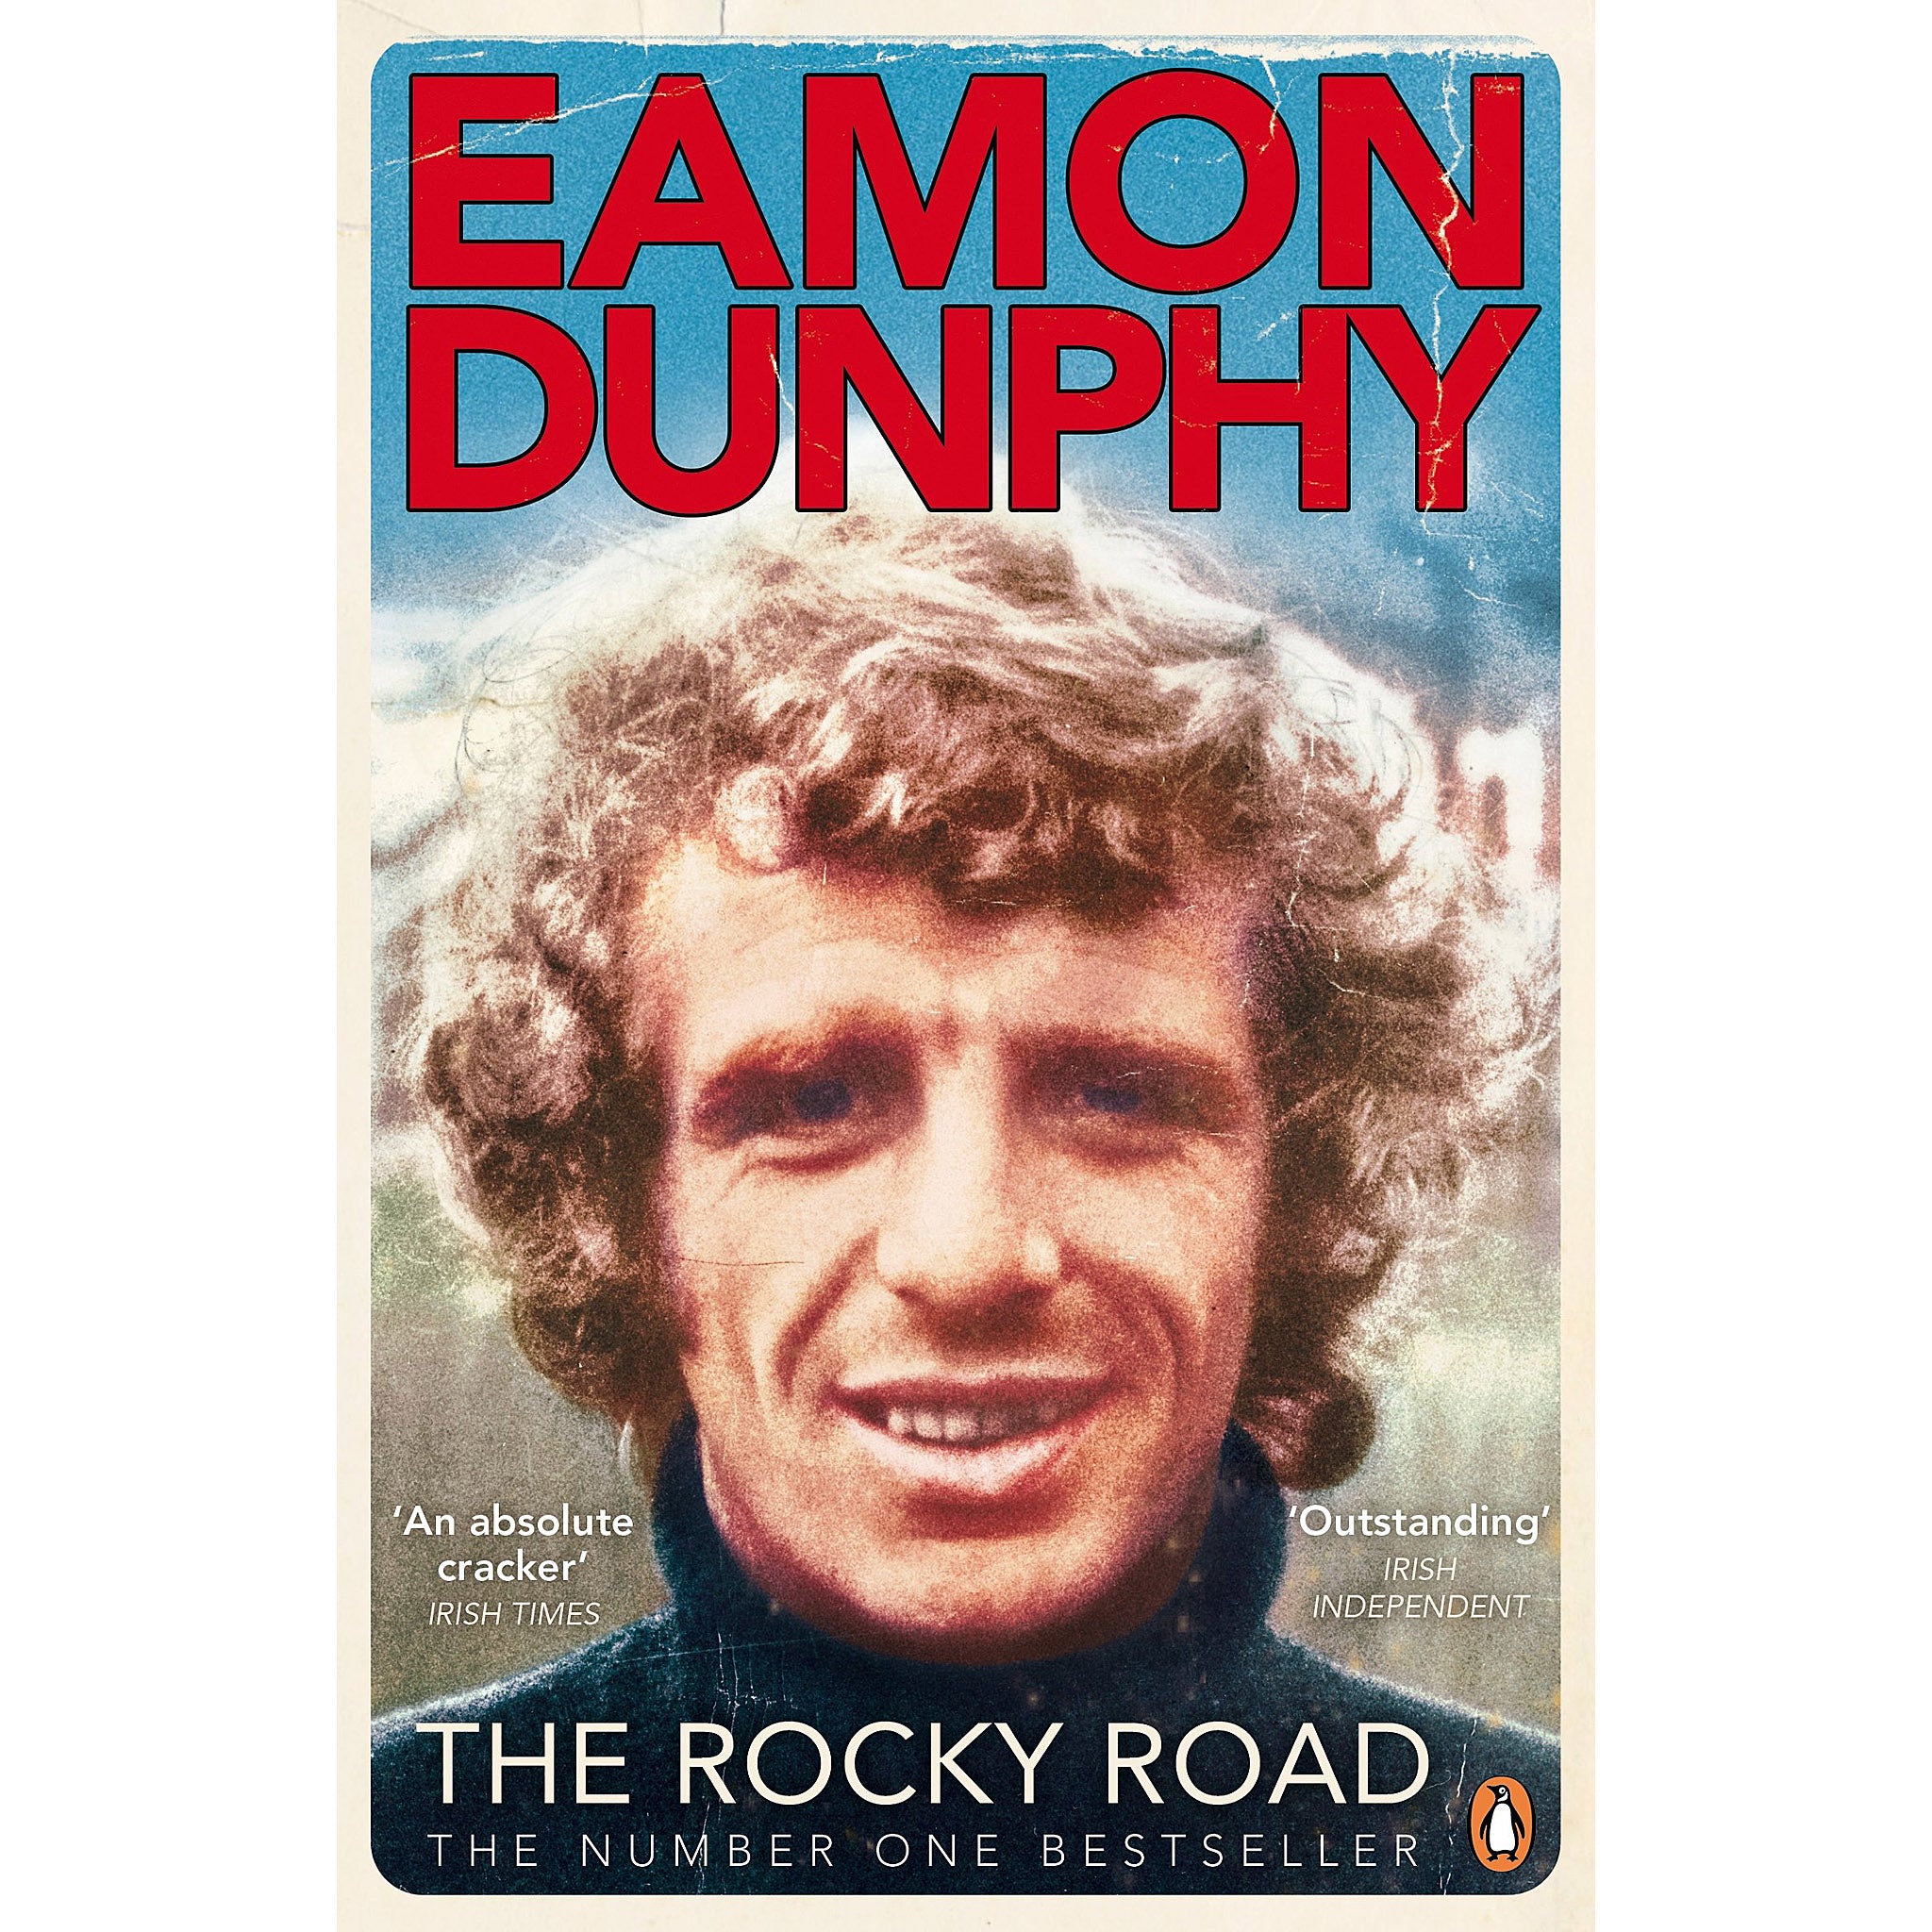 Eamon Dunphy – The Rocky Road